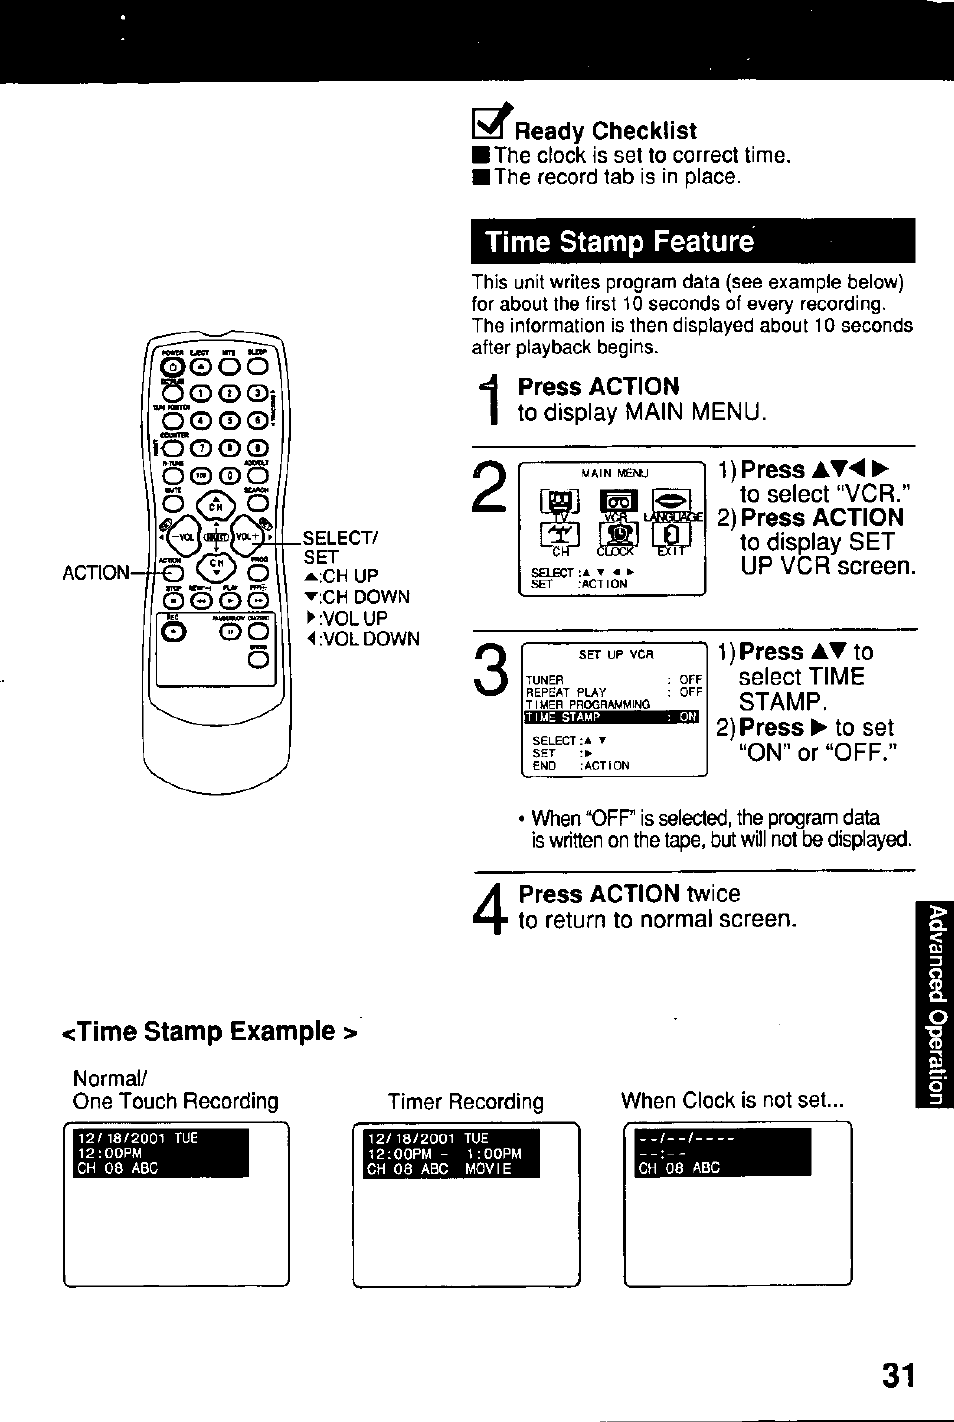 Ready checklist, Press action, To display main menu | 1) press ► to select “vcr, 2) press action, To display set up vcr screen, Press action twice to return to normal screen, Time stamp feature, Time stamp example, 1) press | Panasonic Combinatin VCR AG-513E User Manual | Page 31 / 40